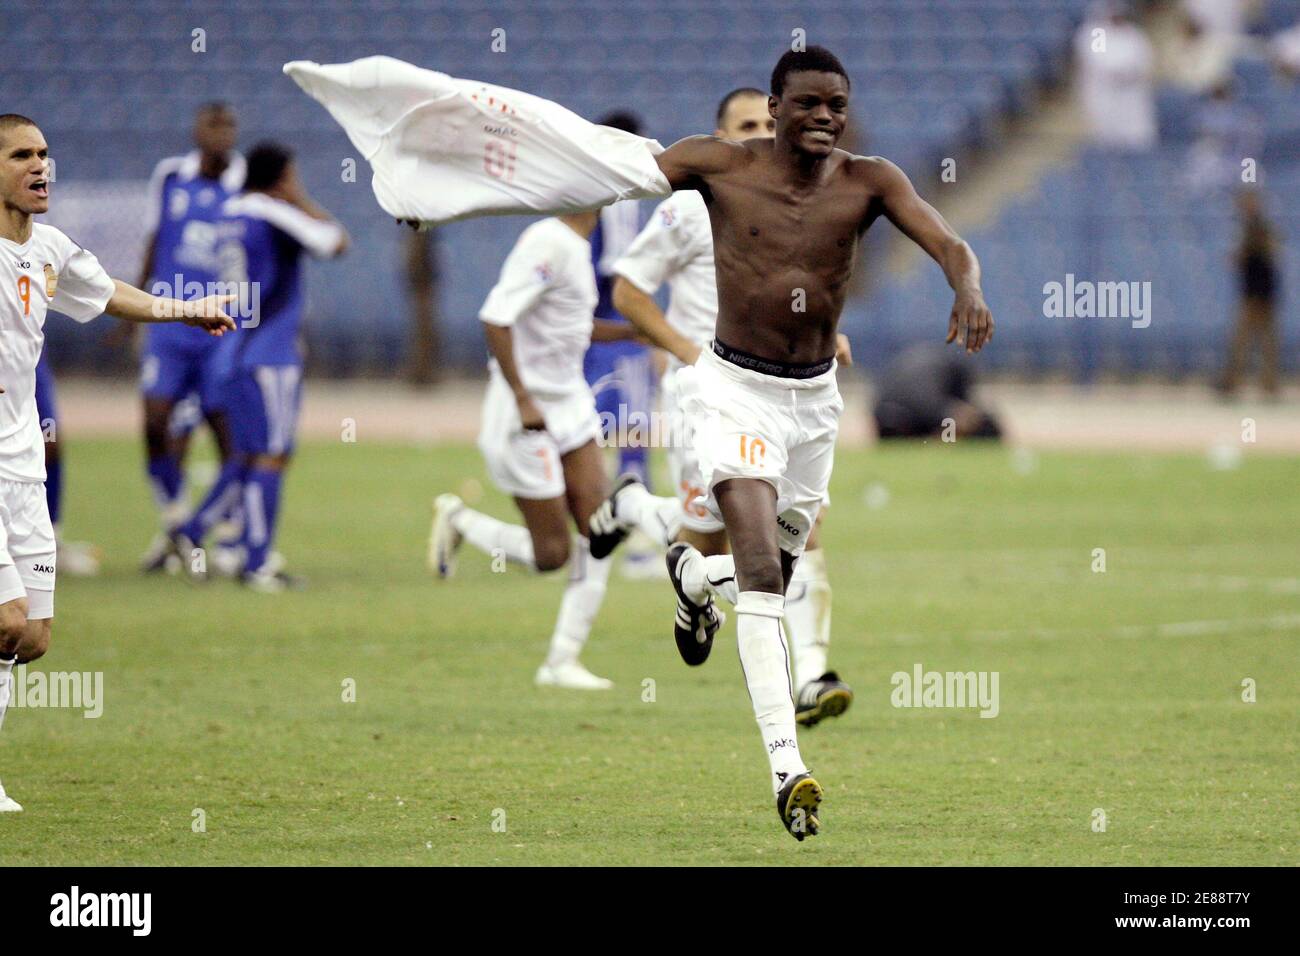 Qatar's Umm Salal player Ibrahhim Inday reacts after they won their match against Saudi's Al Hilal during their AFC Champions League soccer match at King Fahad stadium, in Riyadh  May 26, 2009.   REUTERS/Fahad Shadeed (SAUDI ARABIA SPORT SOCCER) Stock Photo